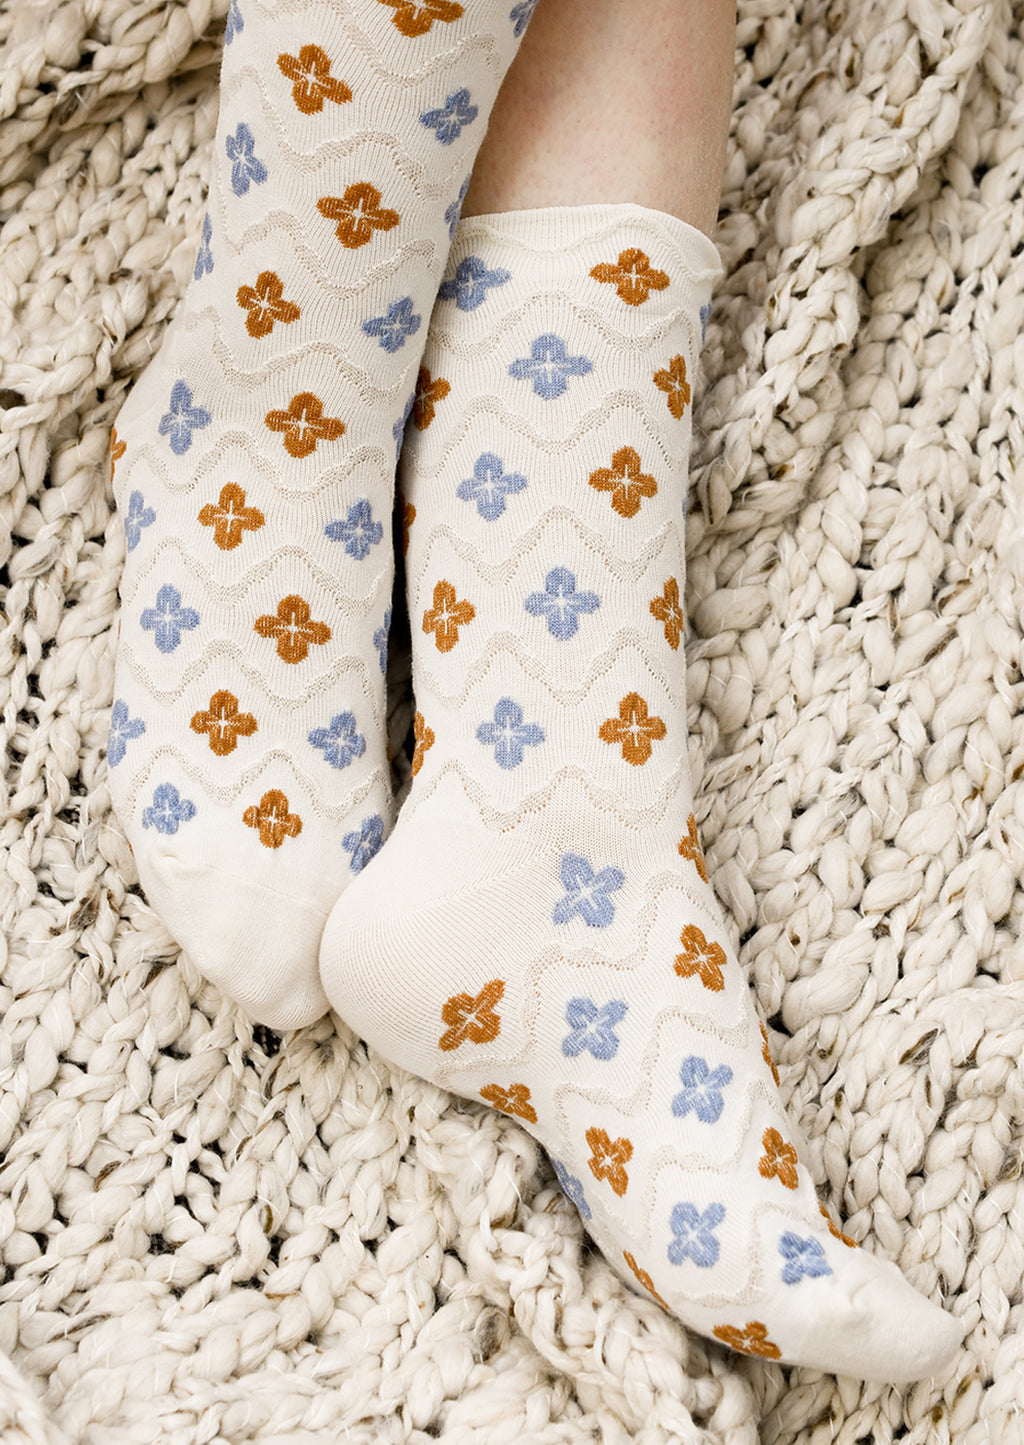 2: A pair of ivory socks with raised diamond texture and blue and brown clover shapes.